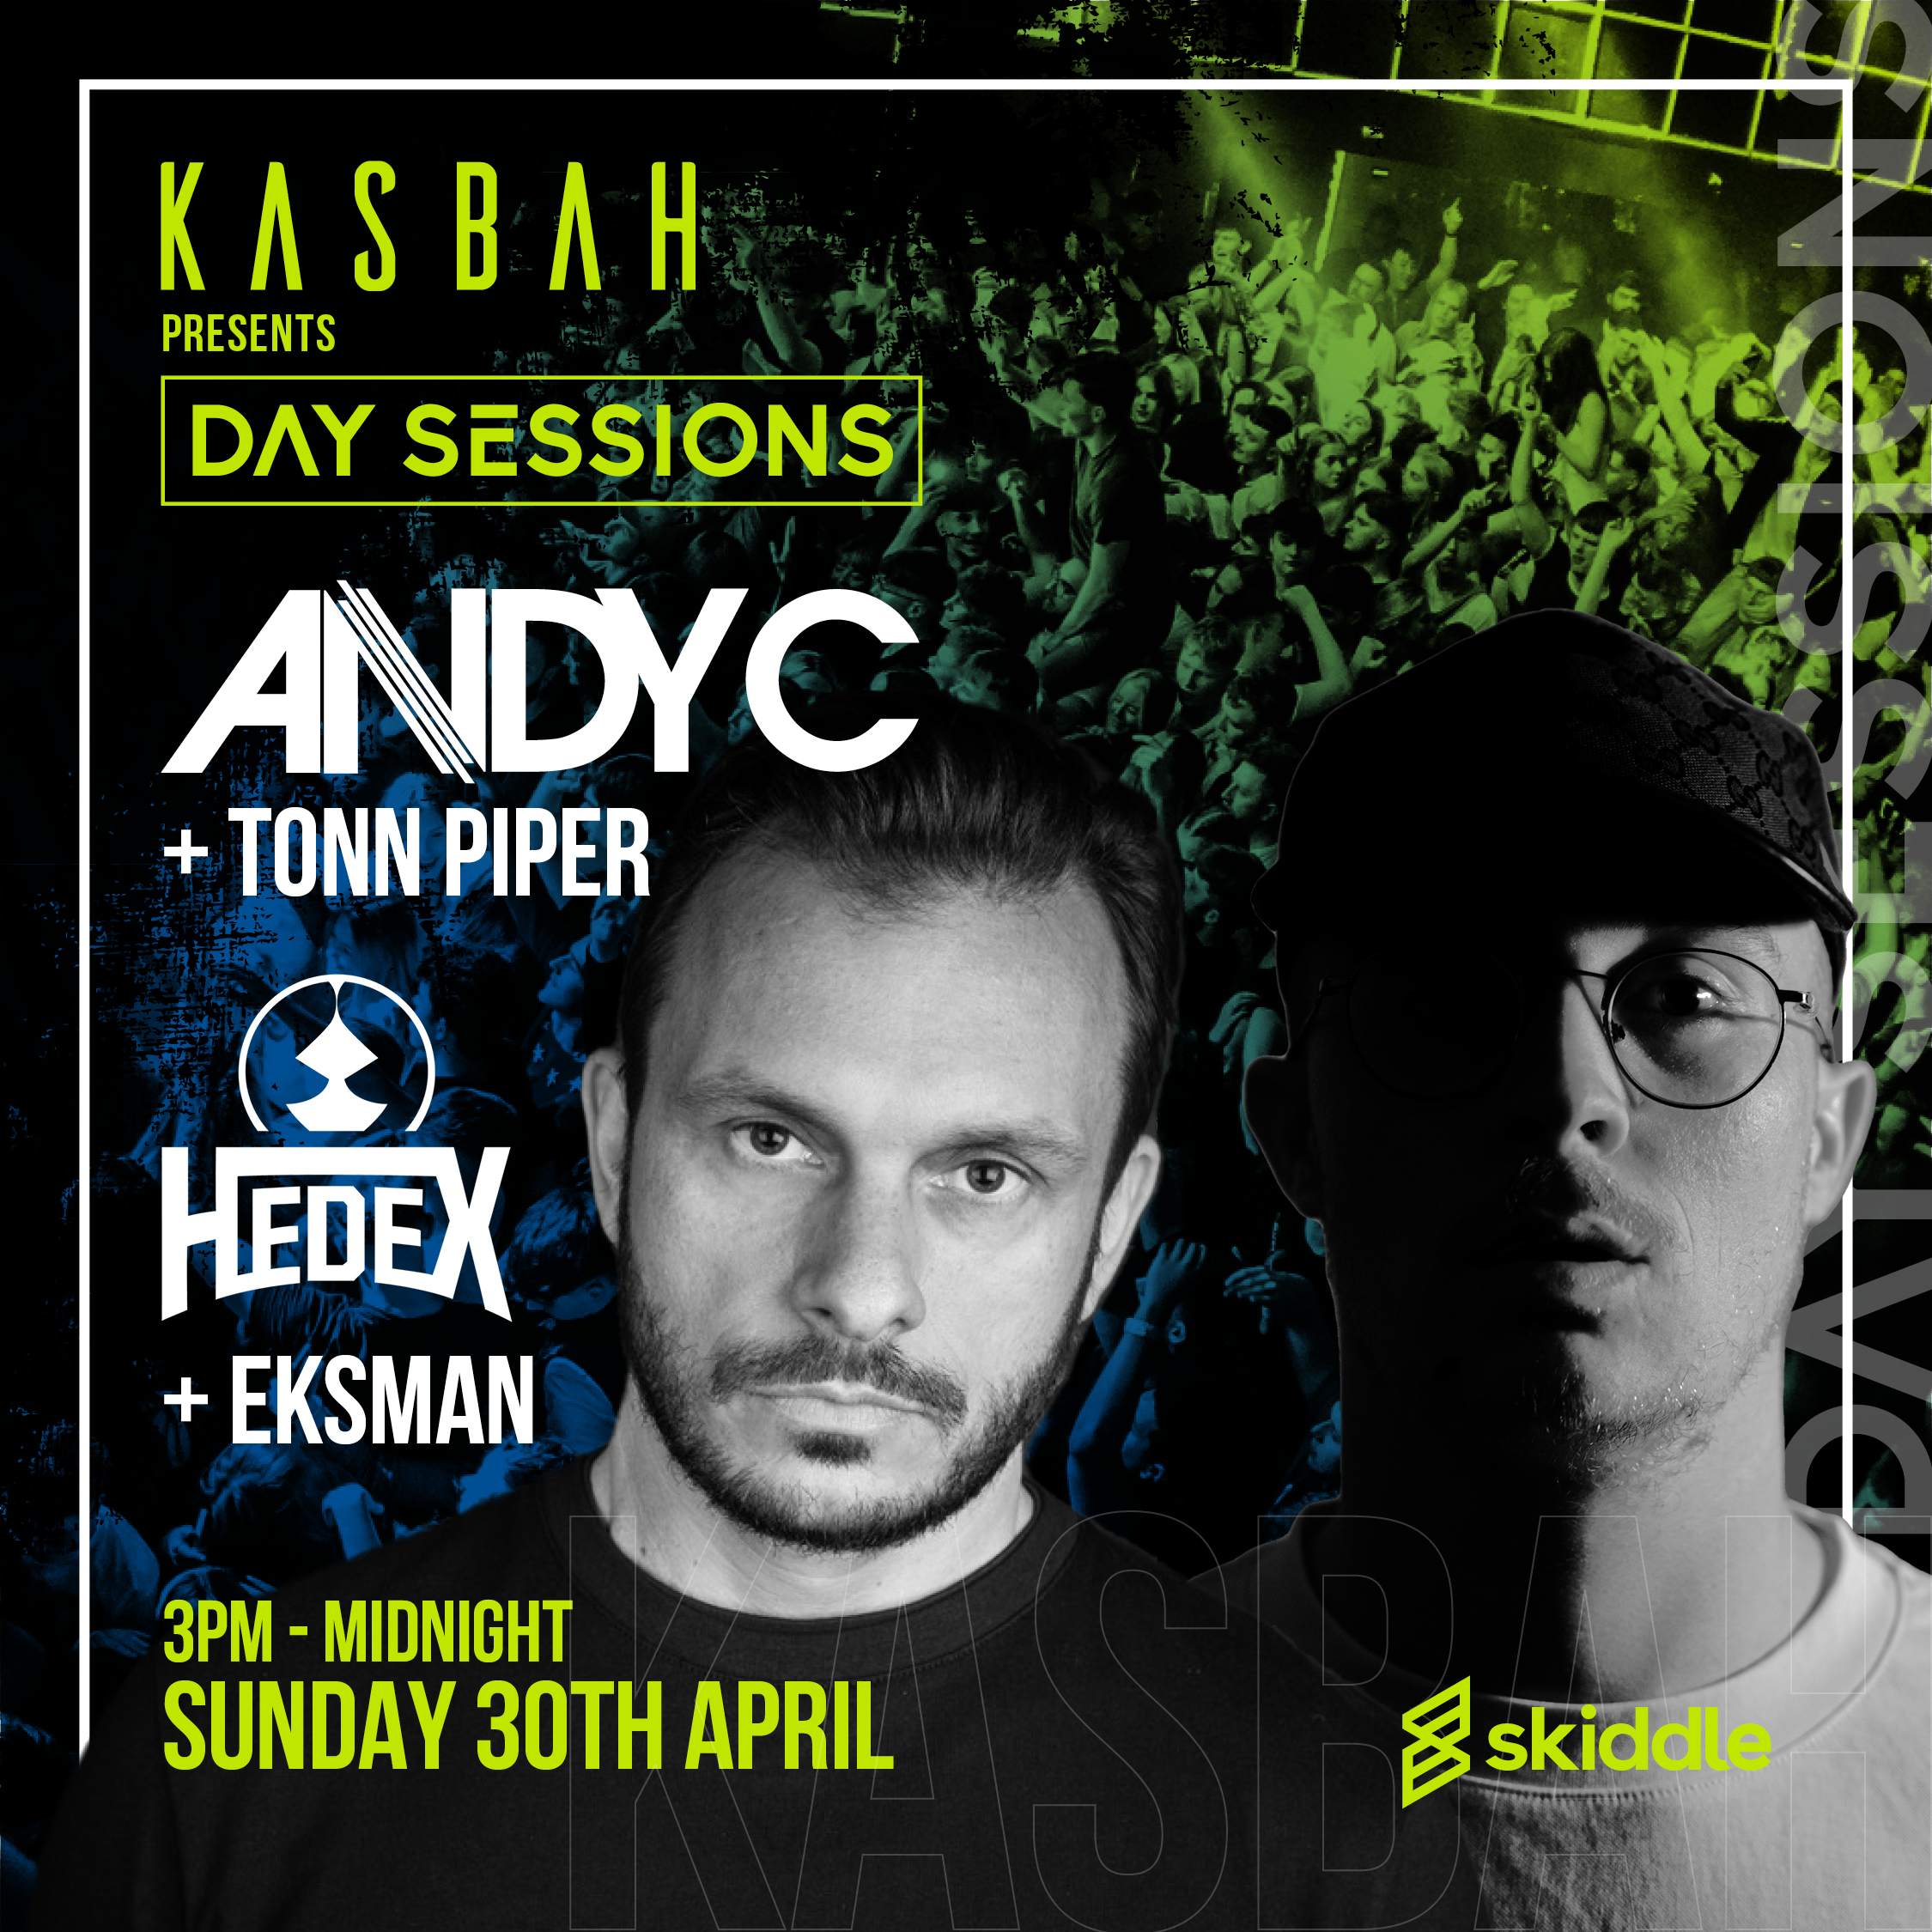 Andy C + Hedex (Day Sessions) - フライヤー表